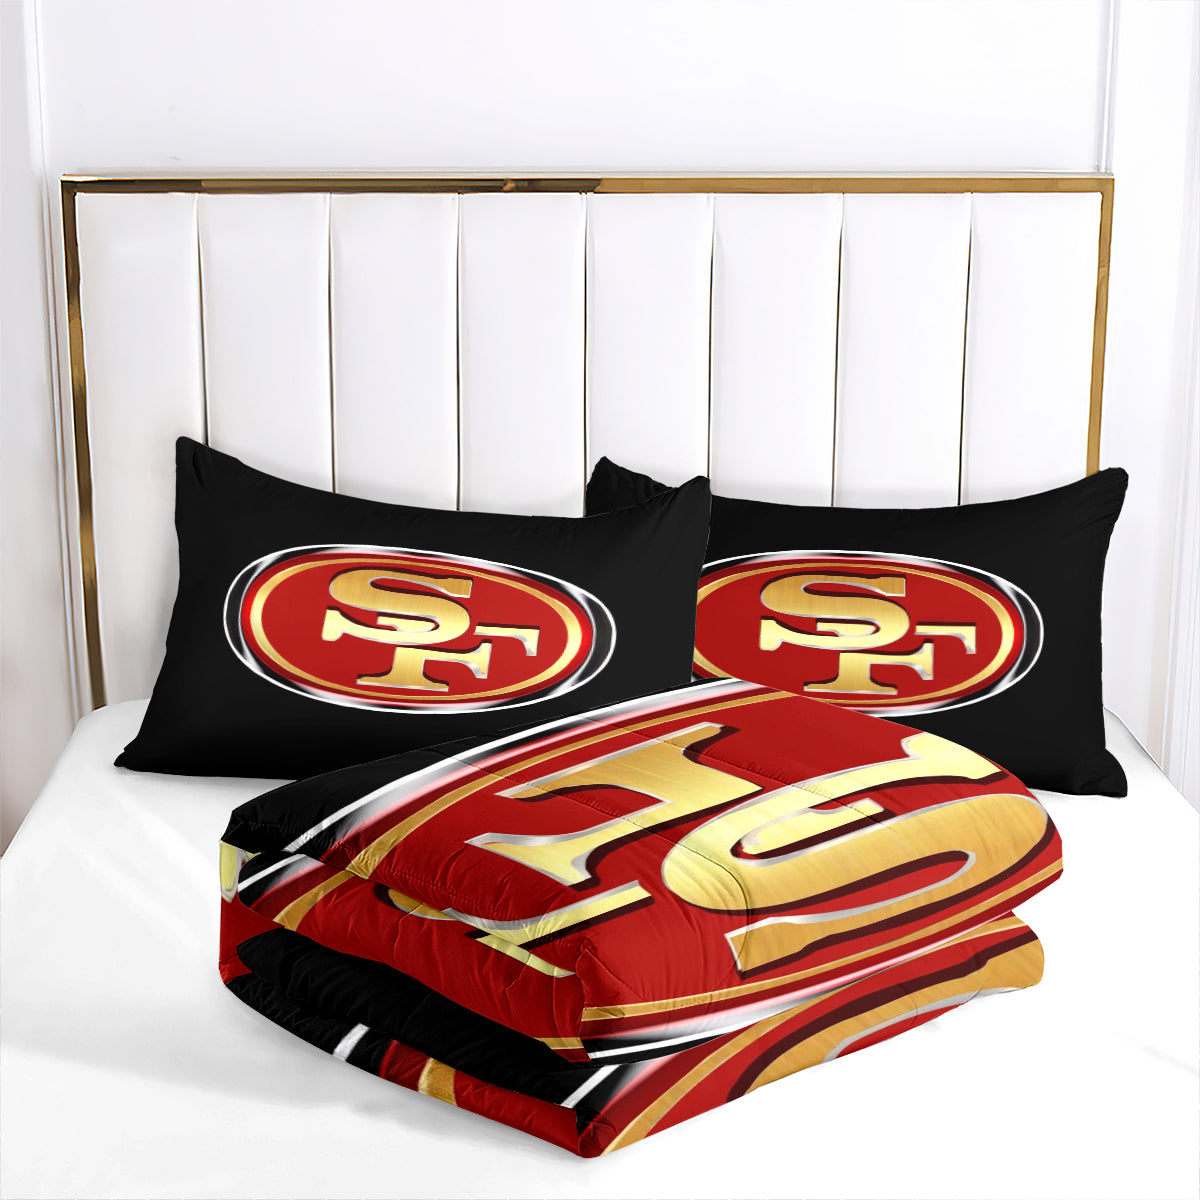 San Francisco Rugby 49ers Comforter Pillowcases 3PC Sets Blanket All Season Reversible Quilted Duvet